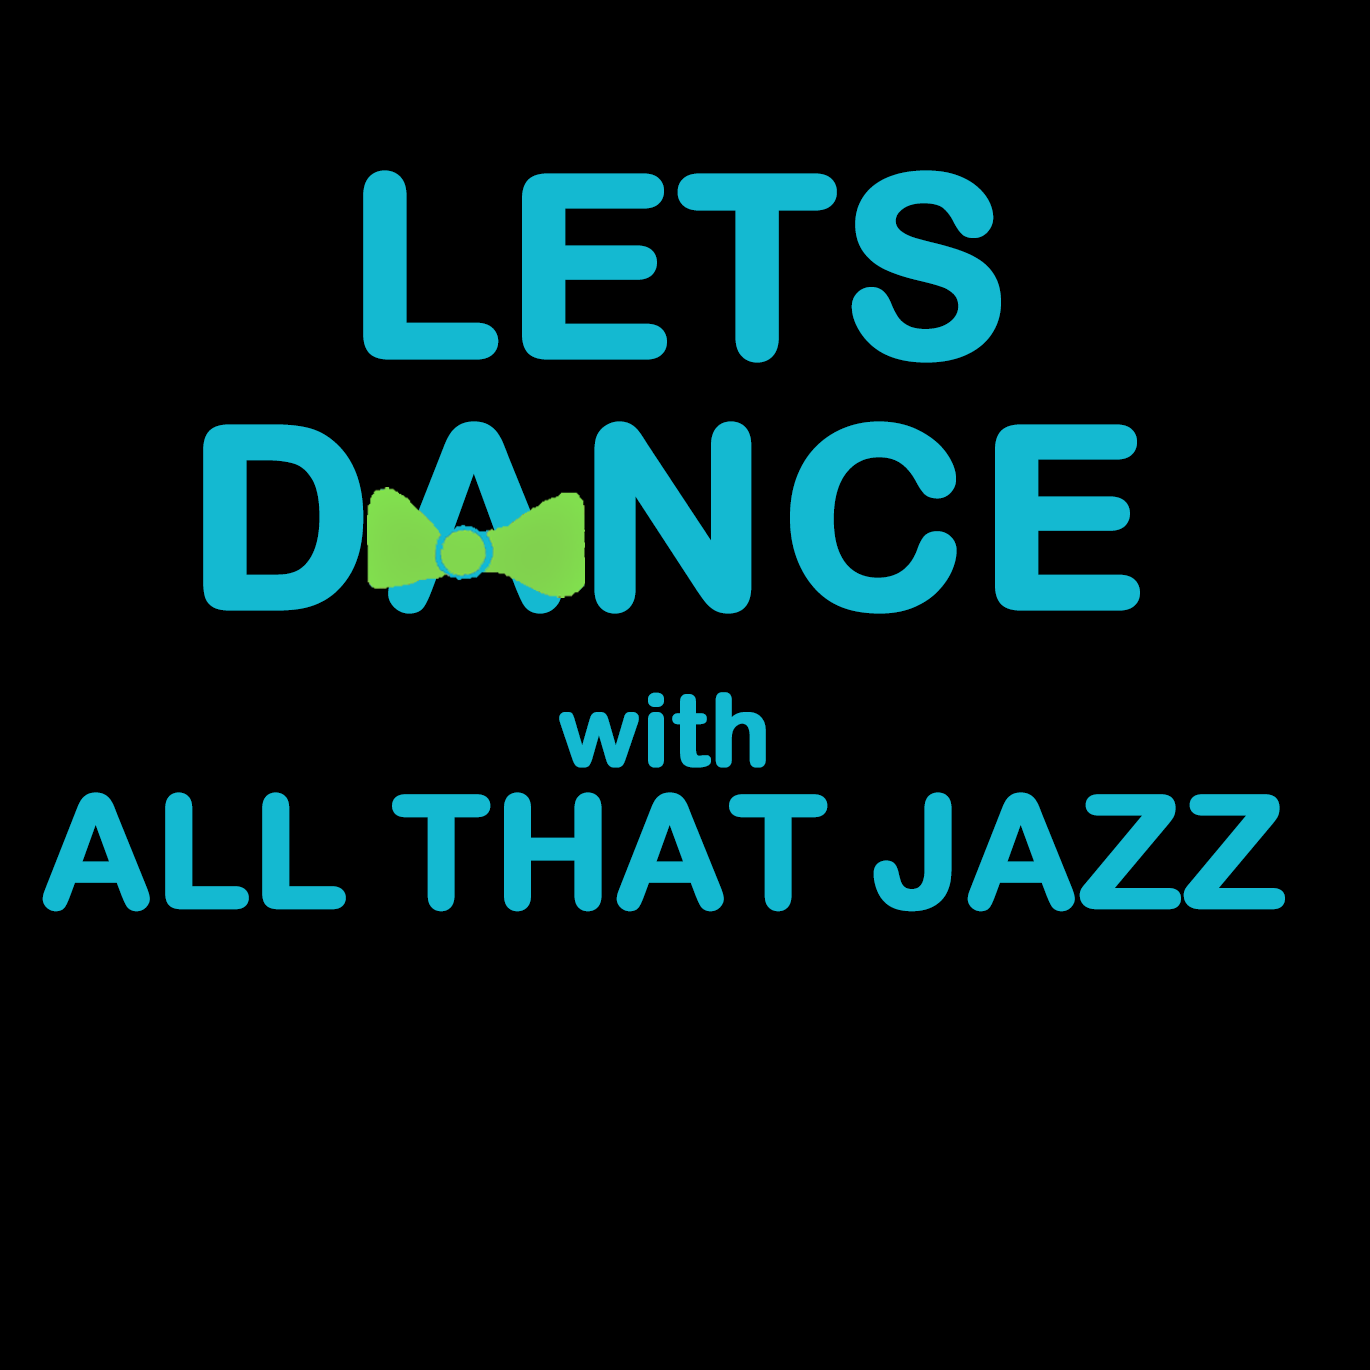 All That Jazz - Let's Dance - 2014 Show - Active Image Media